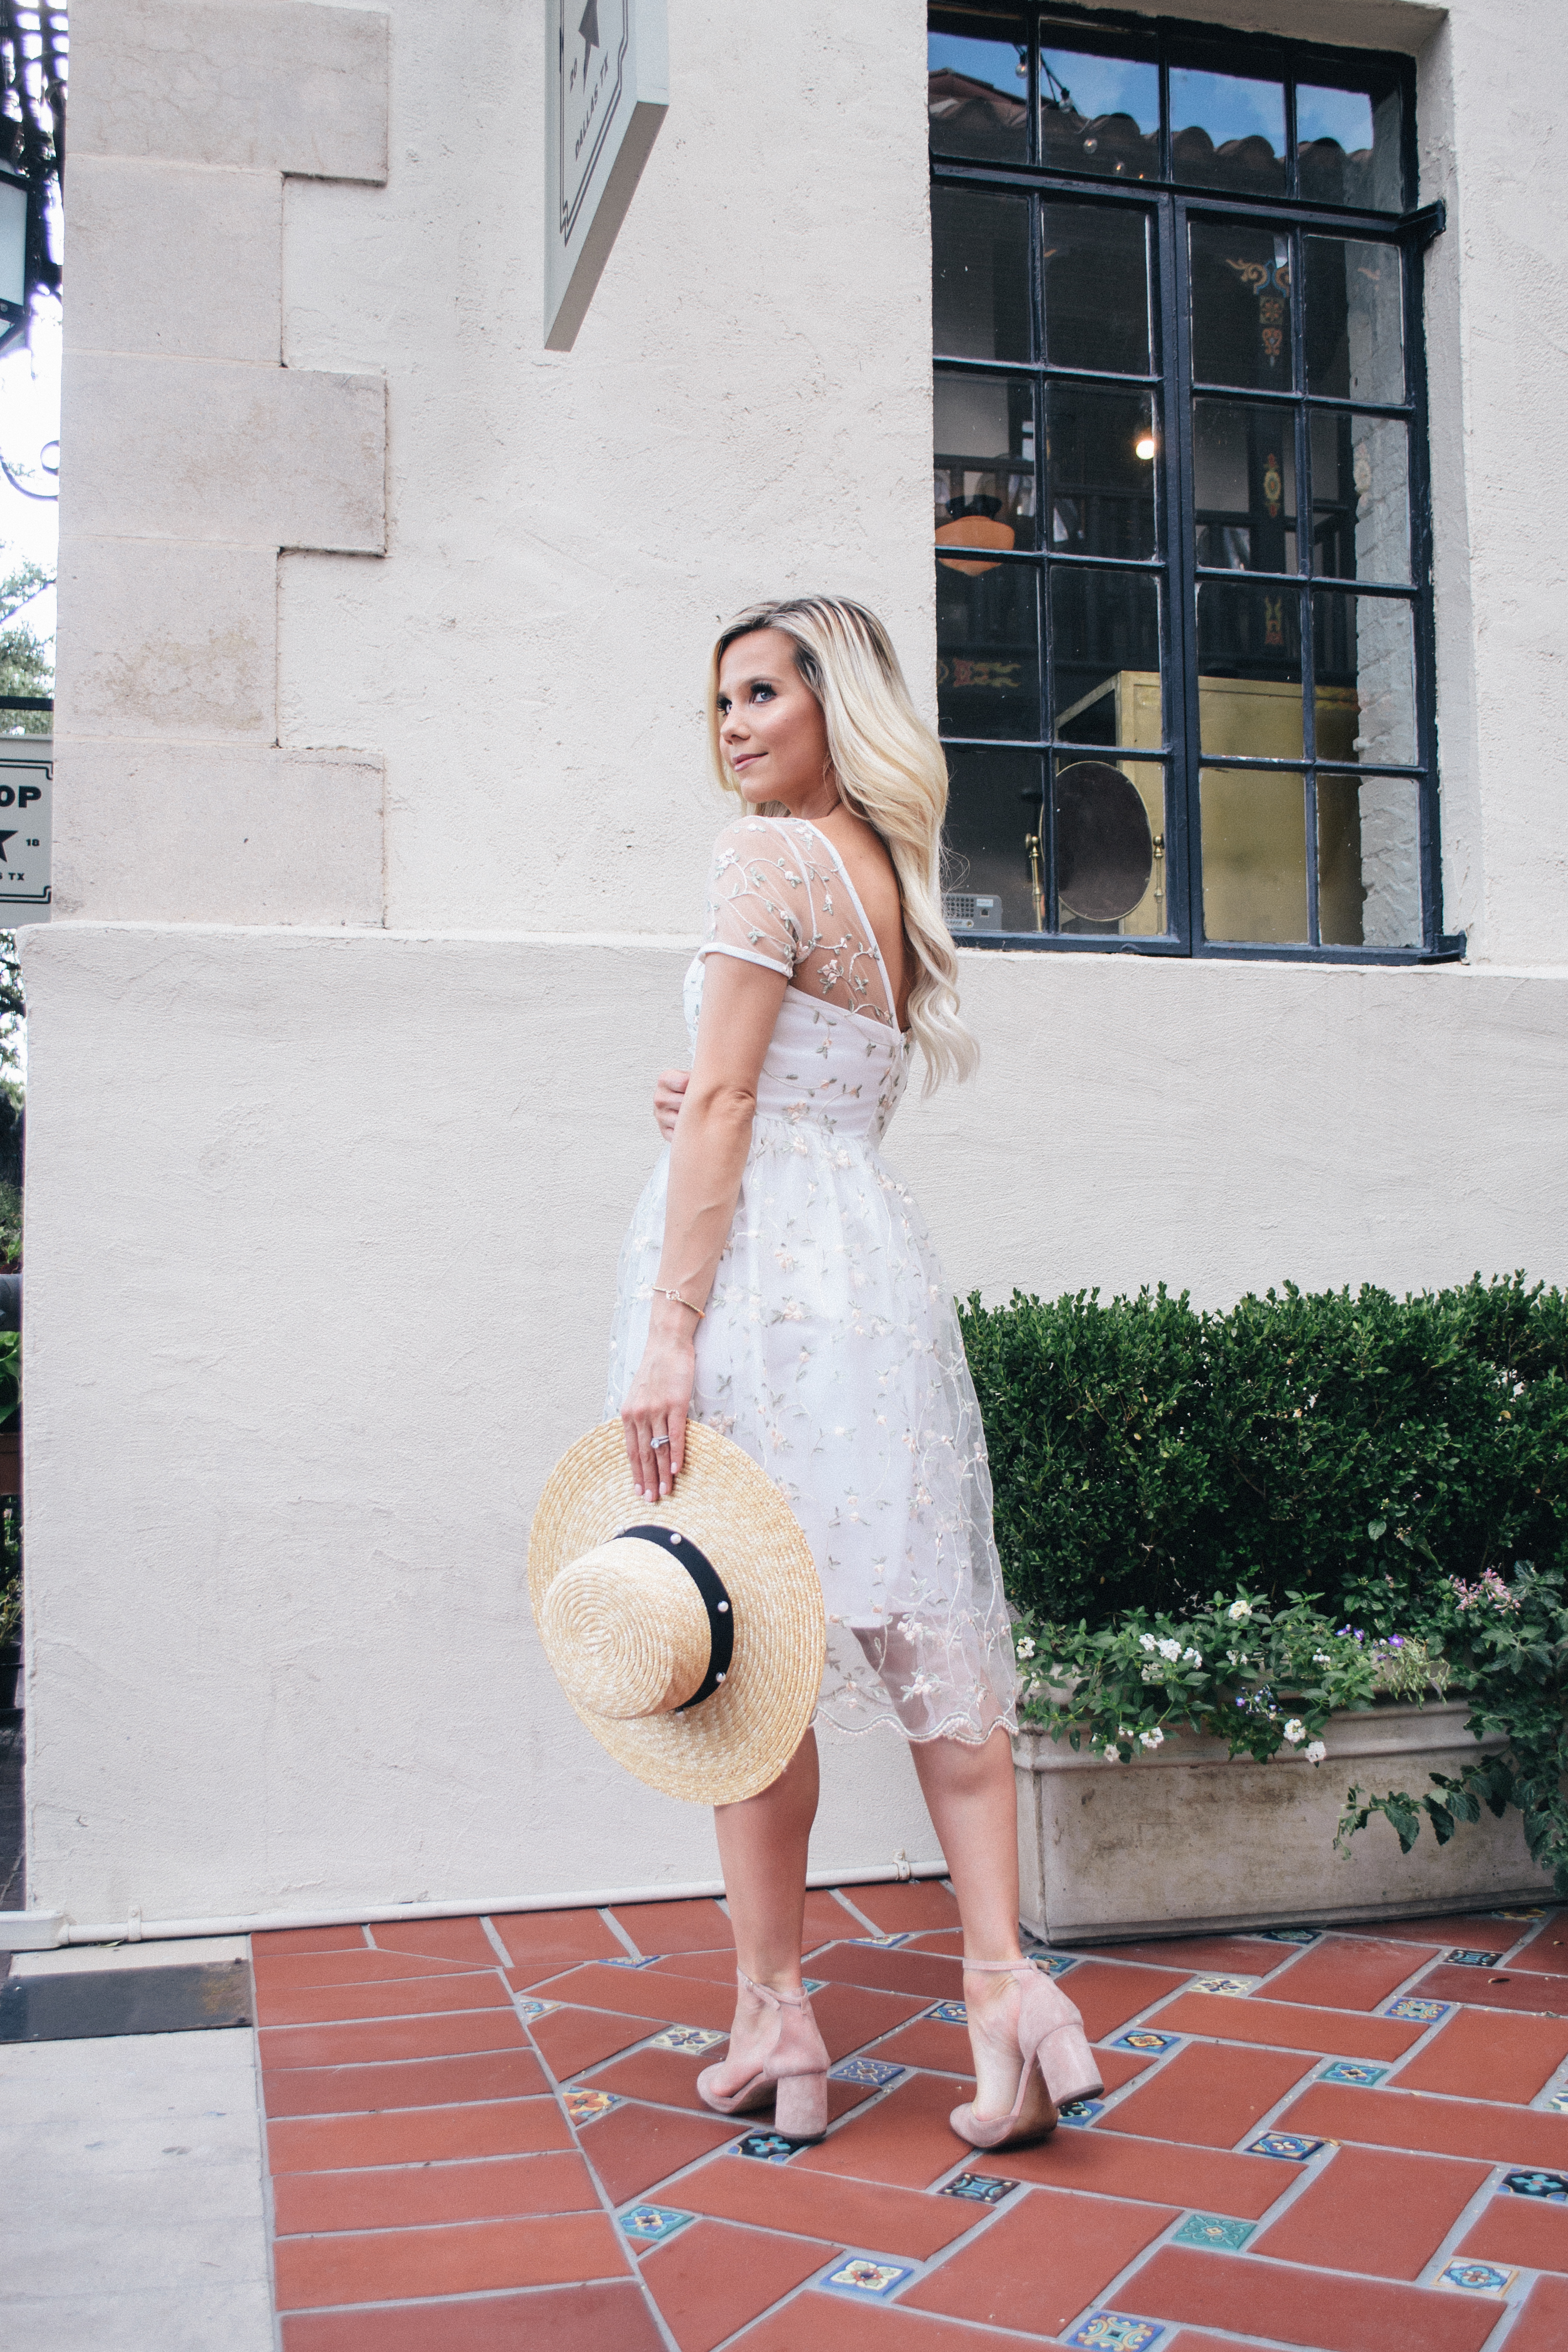 Look like a modern day Grace Kelly with this ivory a-line embroidered dress #1950style #gracekelly #gracekellystyle #modernmuse #vintagestyle |Hannah McDonnell of Glam Life Living a Dallas blonde|